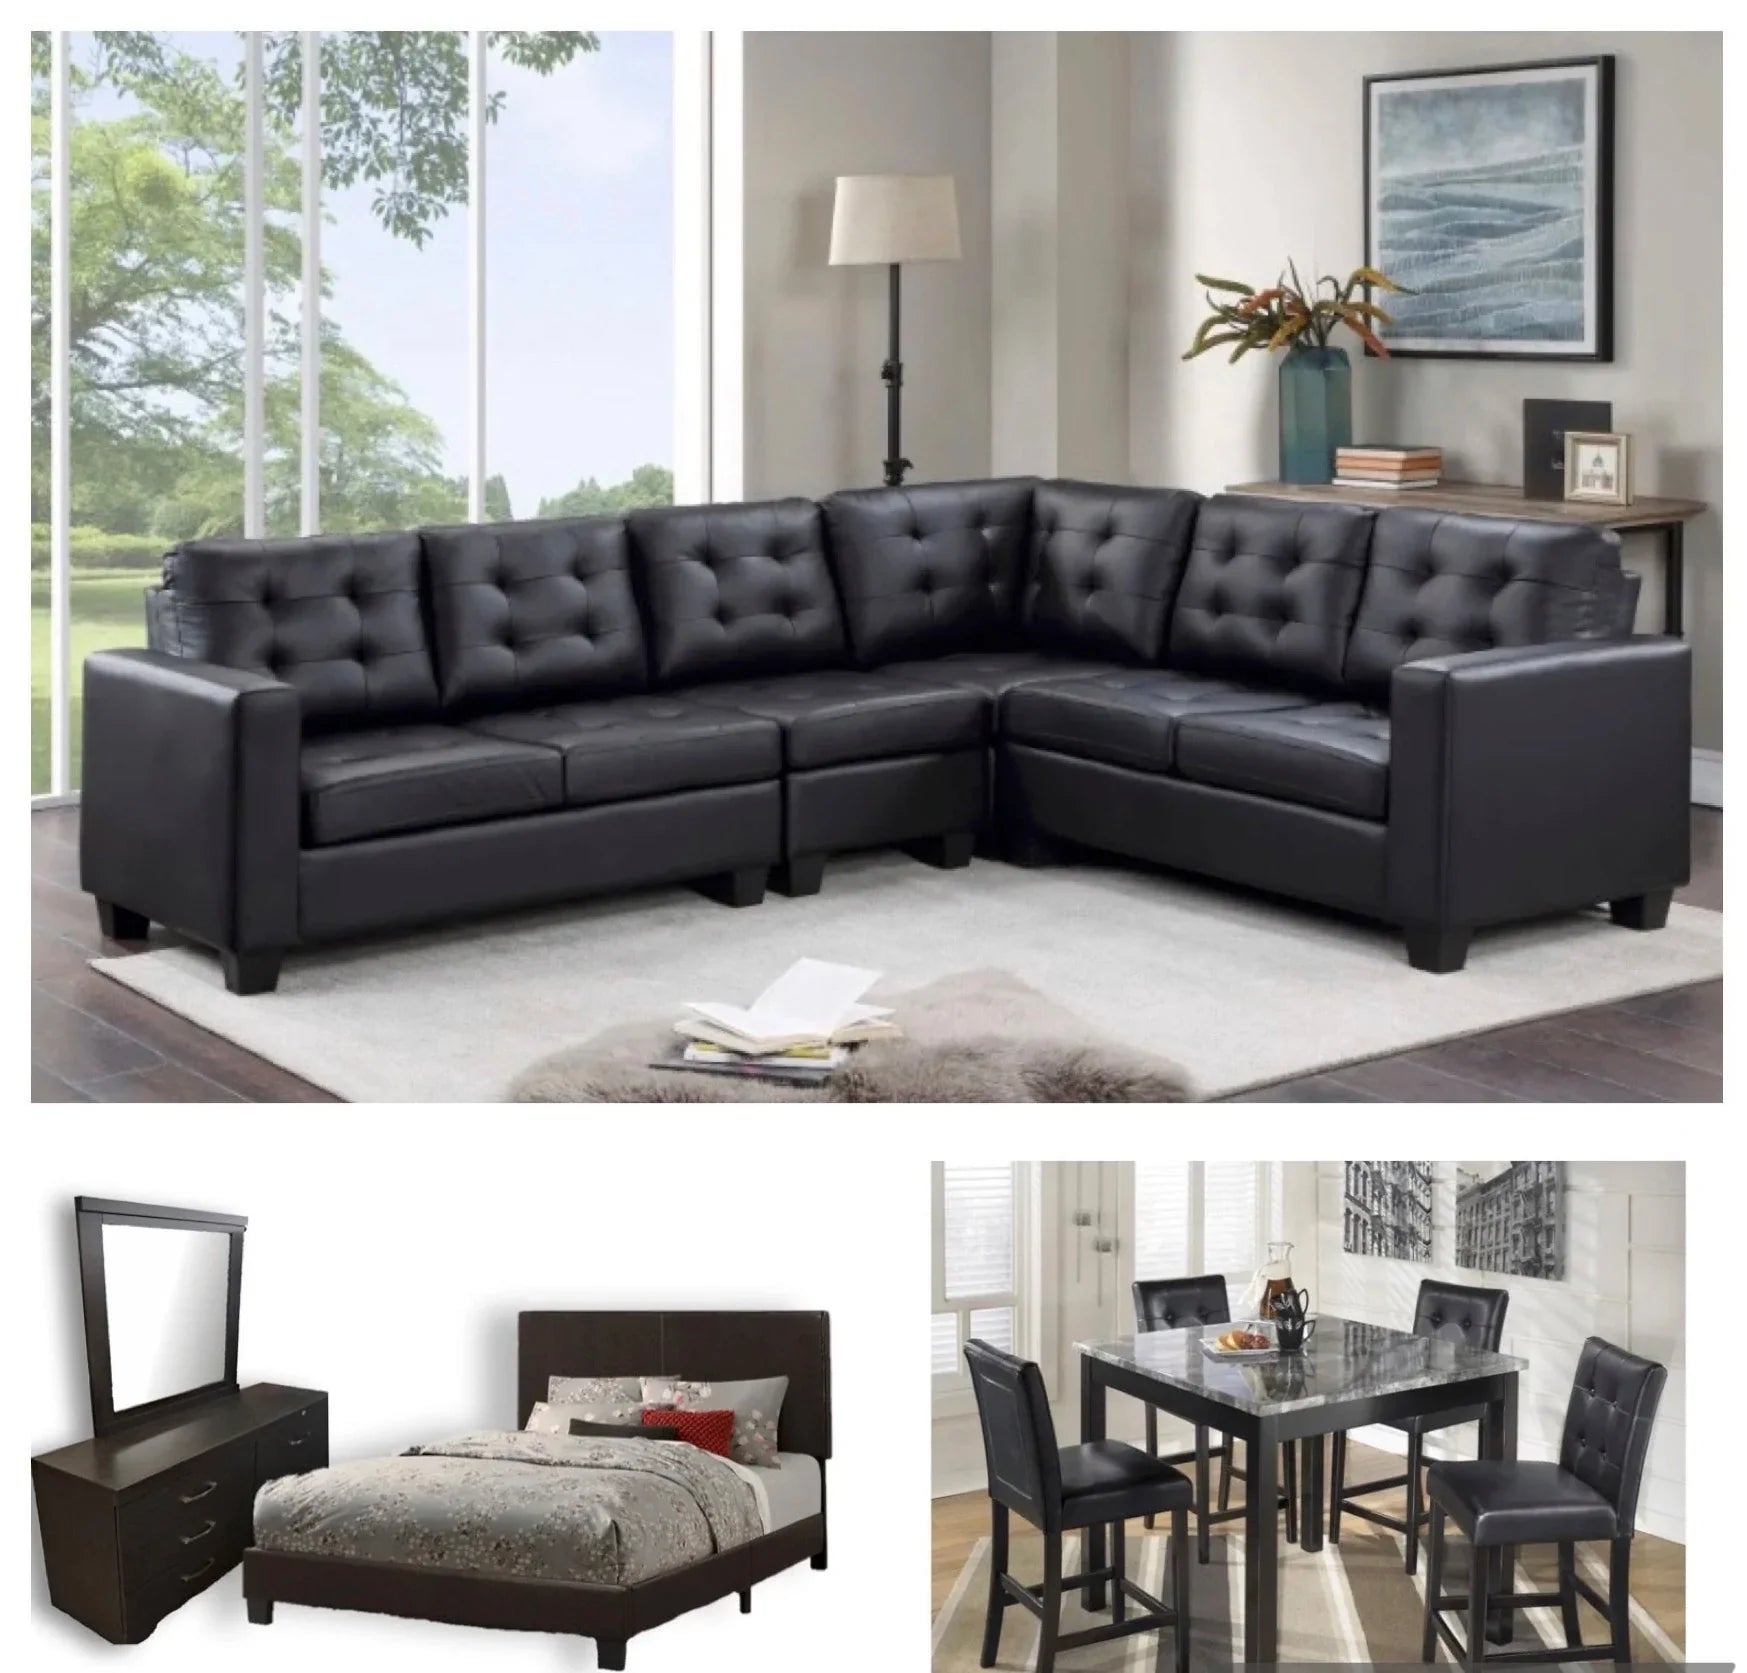 7 Ways to Style Your Complate Apartment Furniture Set